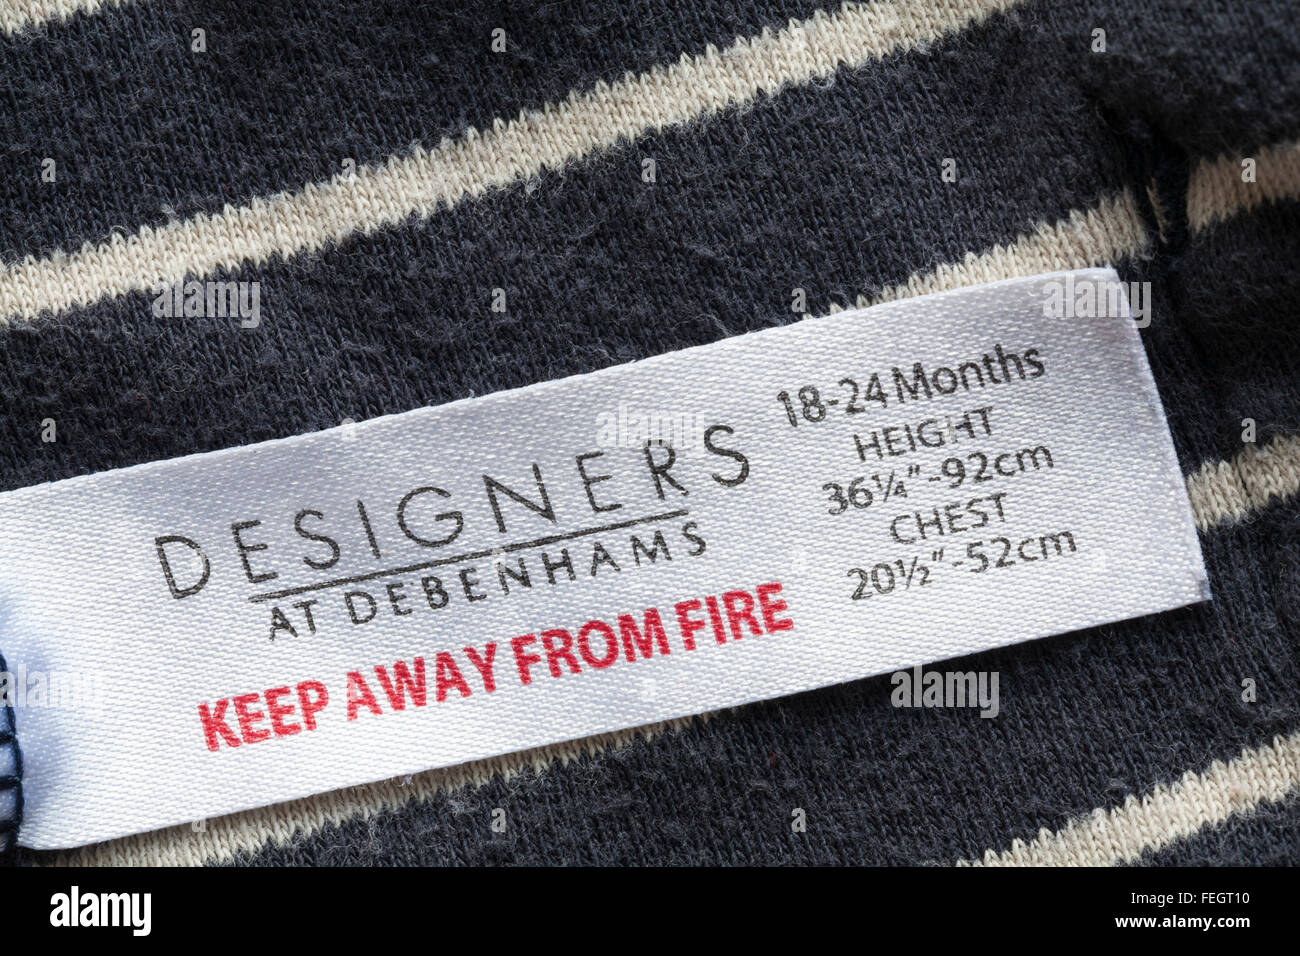 Keep away from fire label in Designers at Debenhams garment for 18-24  months Stock Photo - Alamy